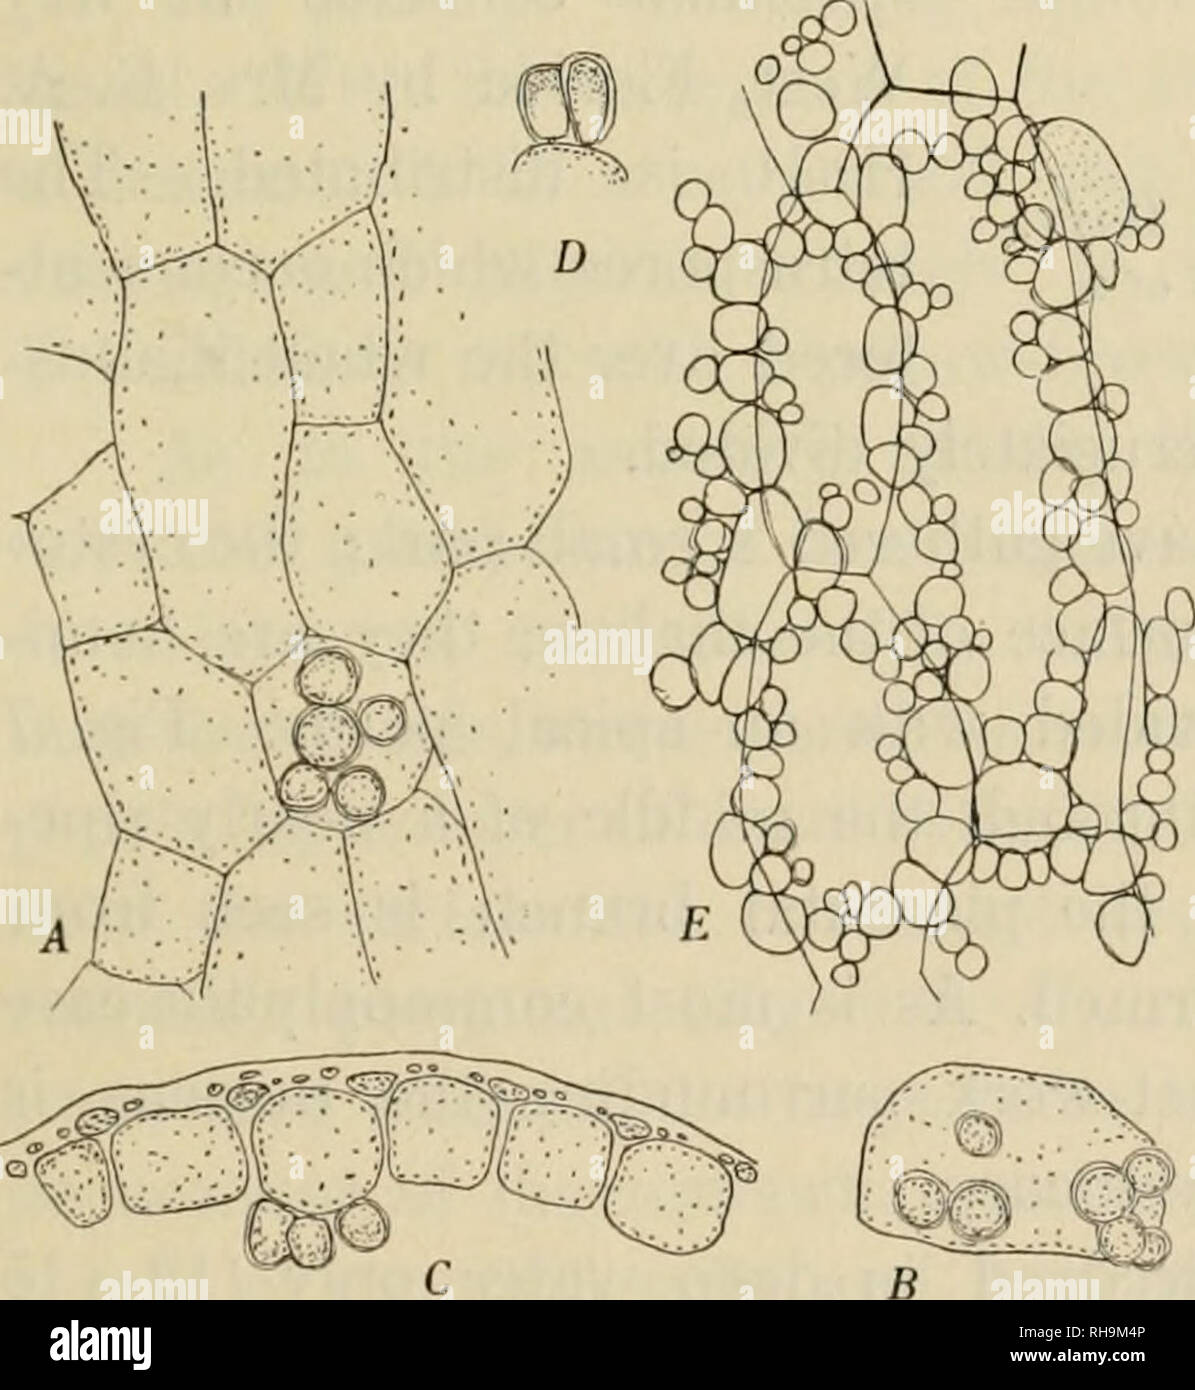 . Botanisk tidsskrift. Plants; Plants -- Denmark. Fig. 5. Chrysymenia Entero- morpha Harv. (about natural size).. Fig. 6. Chrysymenia Enteromorpha Harv. A, membrane-cells seen from the innerside; the cell near the middle with a group of glands (70:1). B, another cell with glands (70:1). C, transverse section of the membrane, in the middle a cell with glands (70:1). D, glands (70:1). E, part of the membrane seen from above (compare the text) (125:1), stricted, while their apices are broadly rounded. The sacs are nearly cylindric some- times somewhat flattened. The membrane is rather thin and so Stock Photo